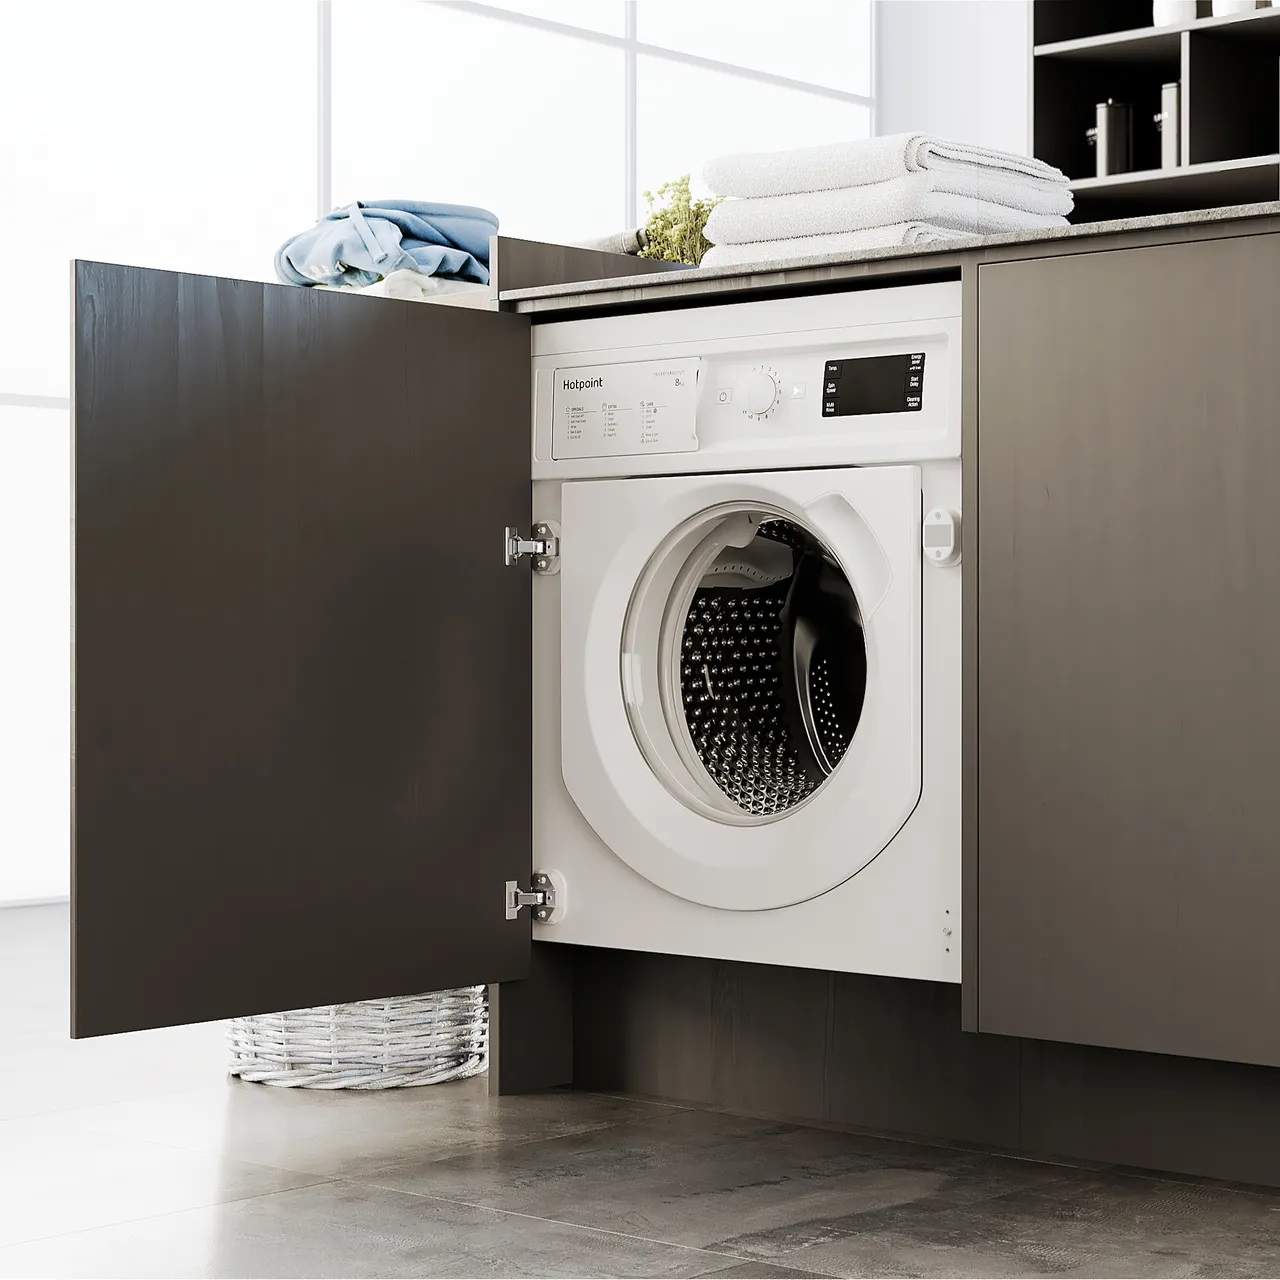 How To Reset Hotpoint Washer